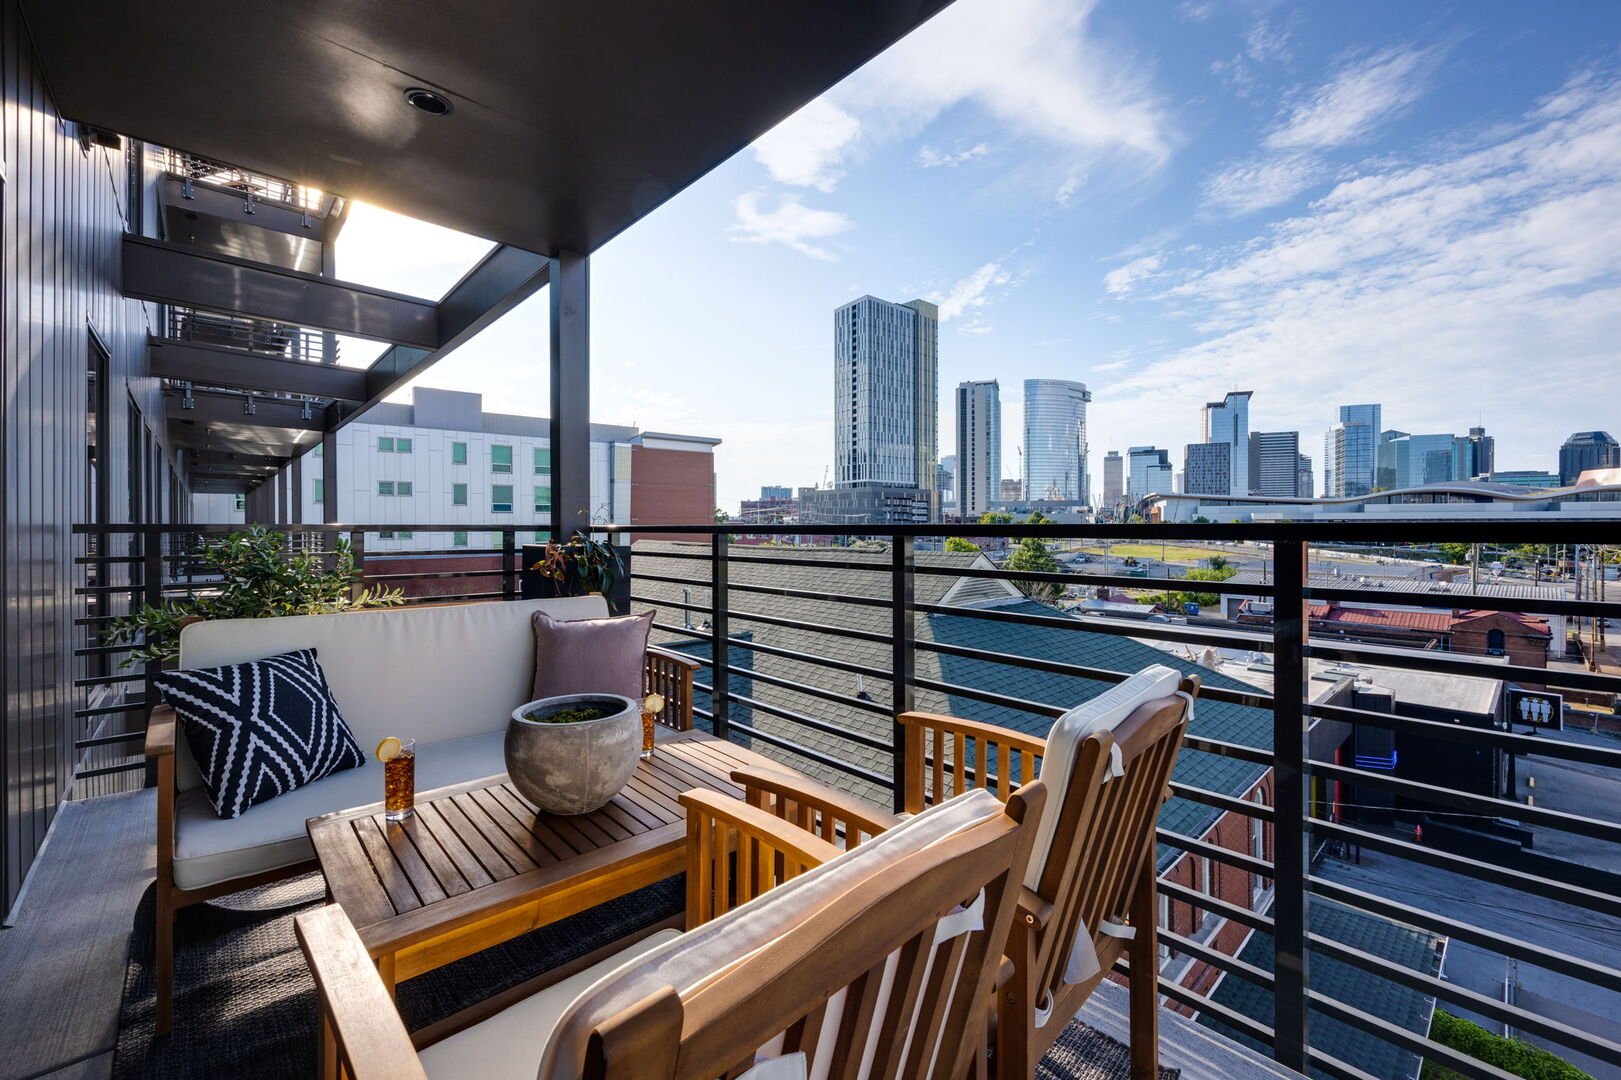 Spacious private patio off the living room with a breathtaking view of Nashville.